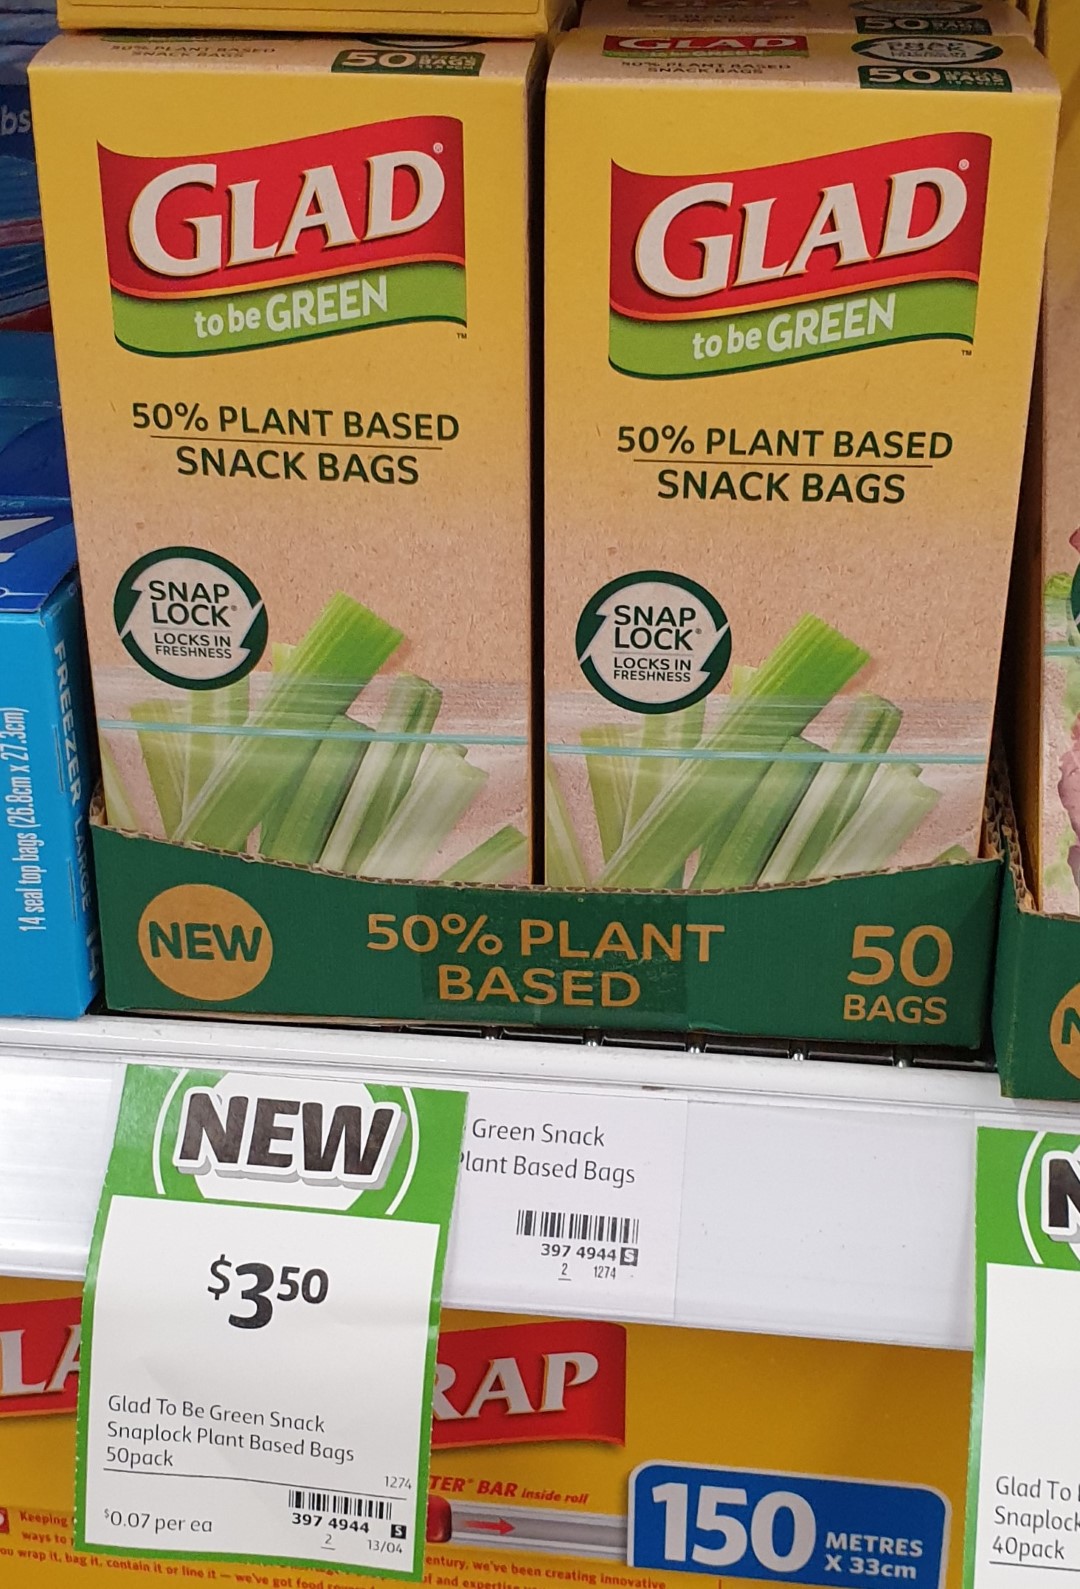 http://newproductsaustralia.com/wp-content/uploads/2021/05/Glad-50-Pack-To-Be-Green-Snack-Bags-PLant-Based.jpg